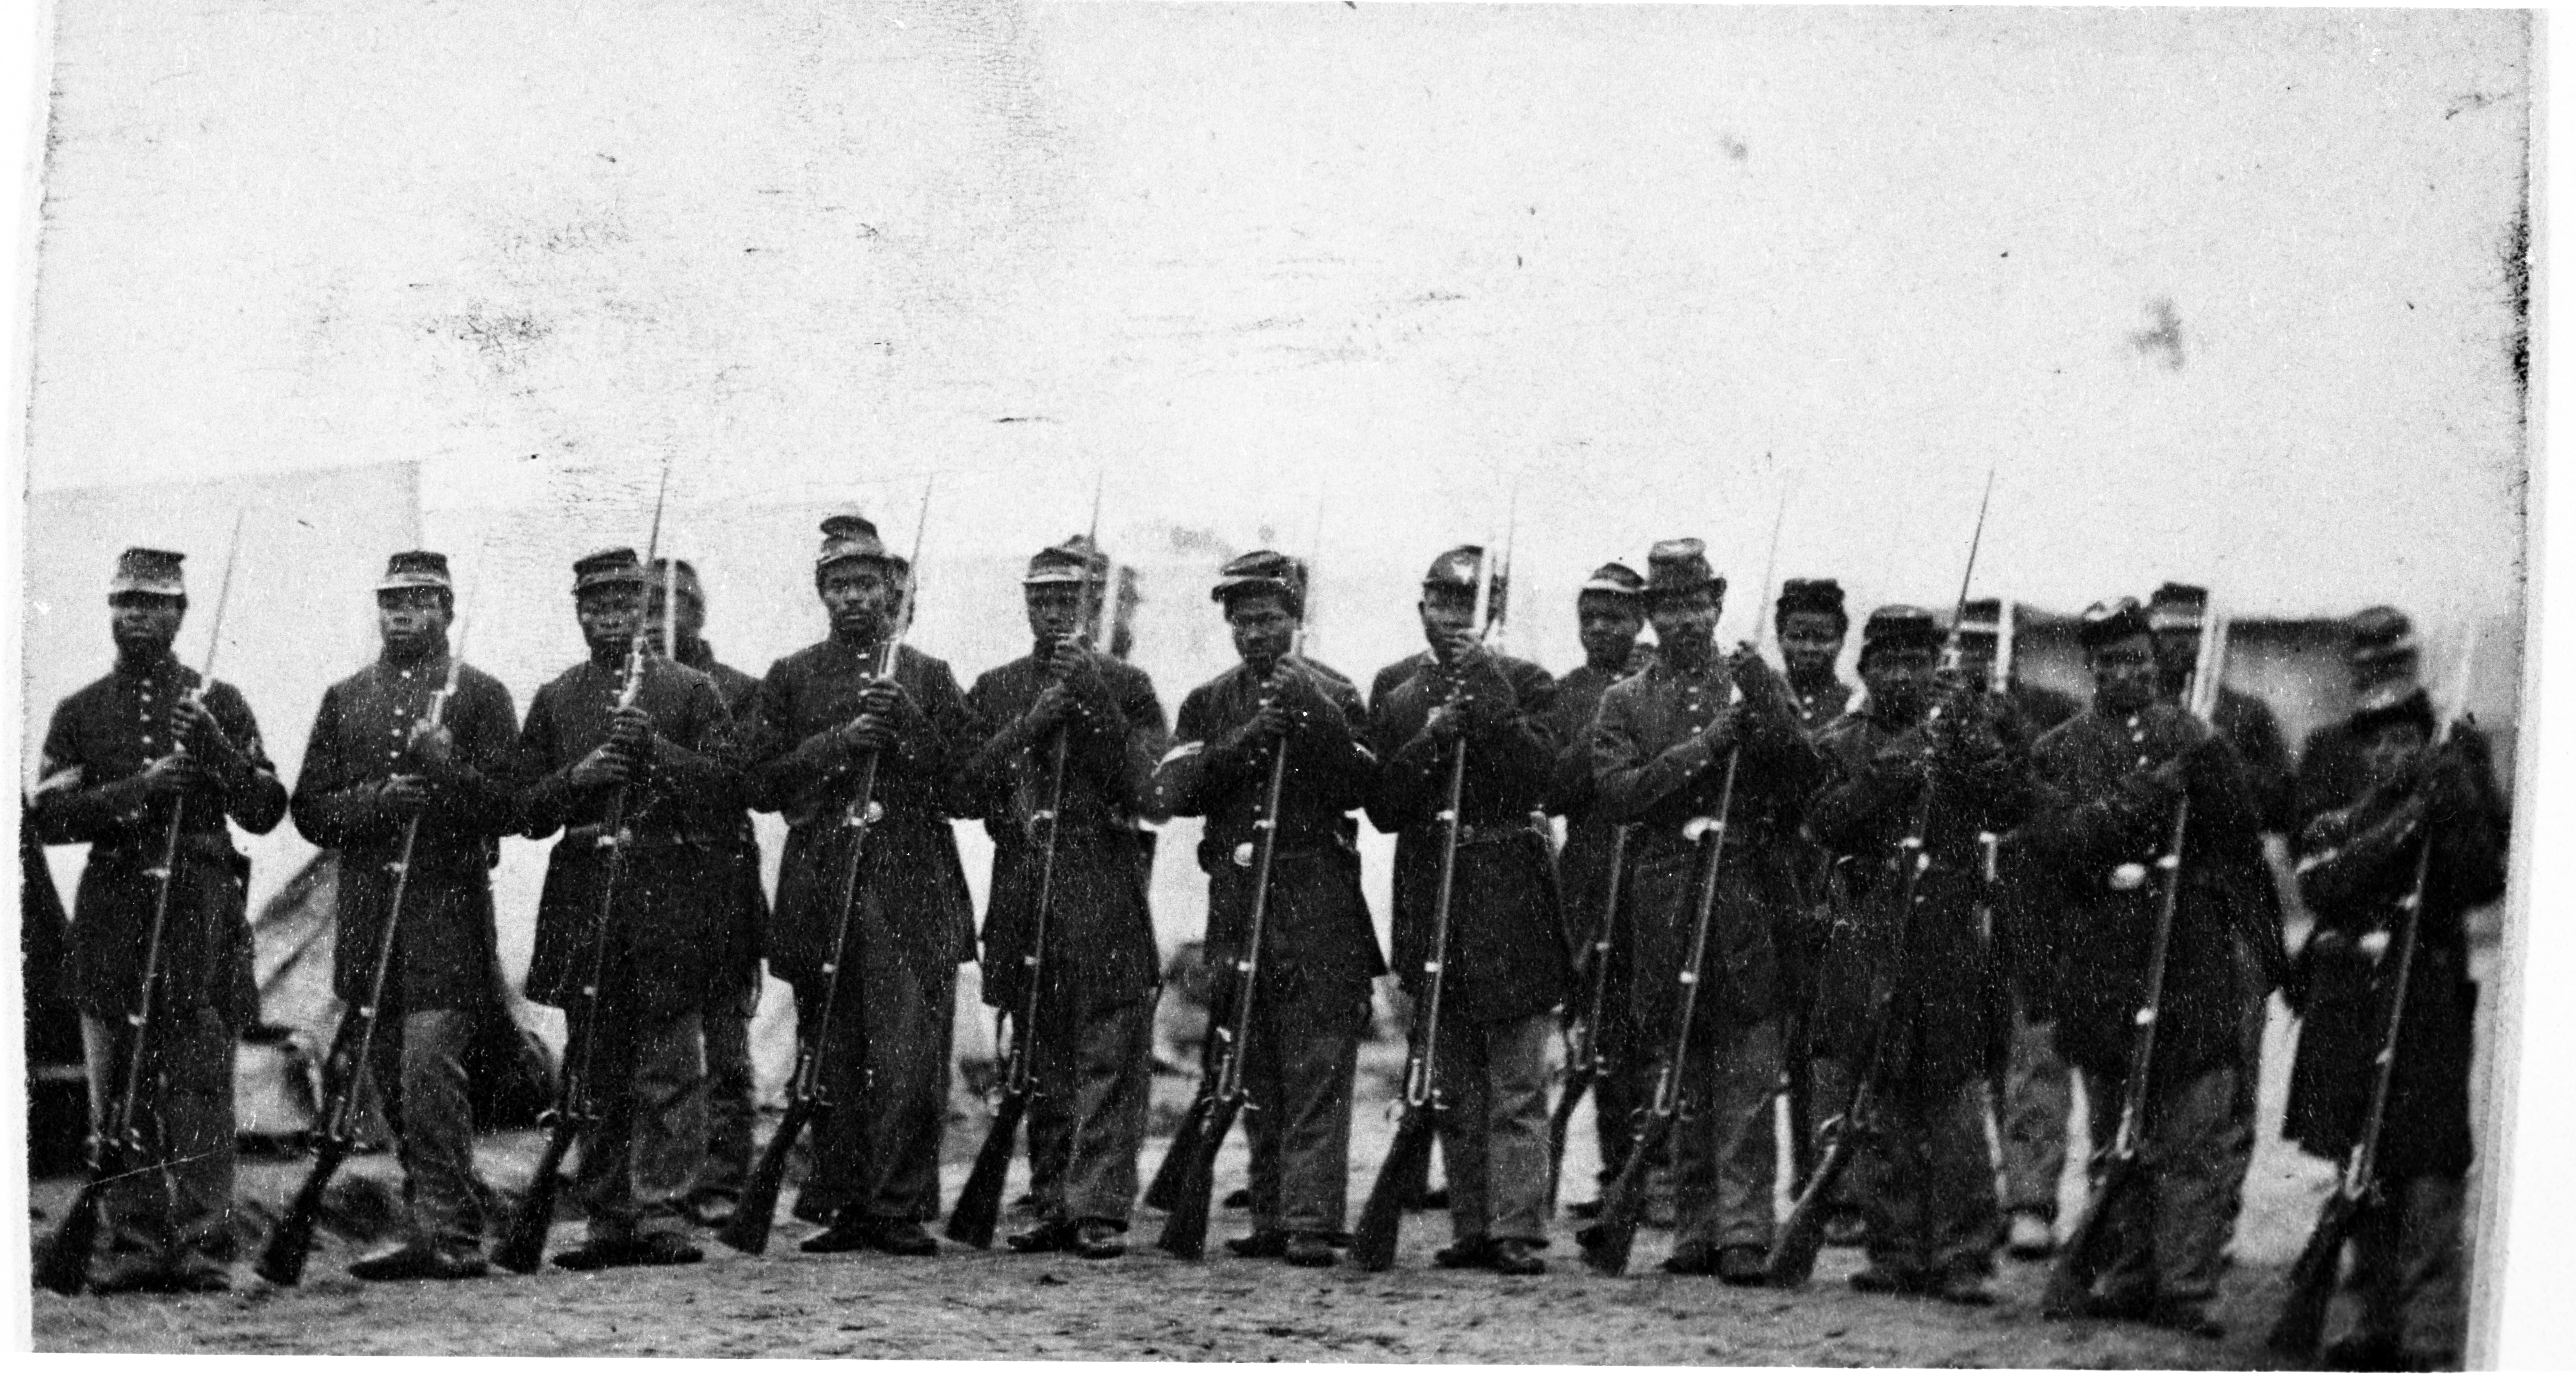 Group of Black Soldiers in Civil War era uniforms standing in formation with their weapons